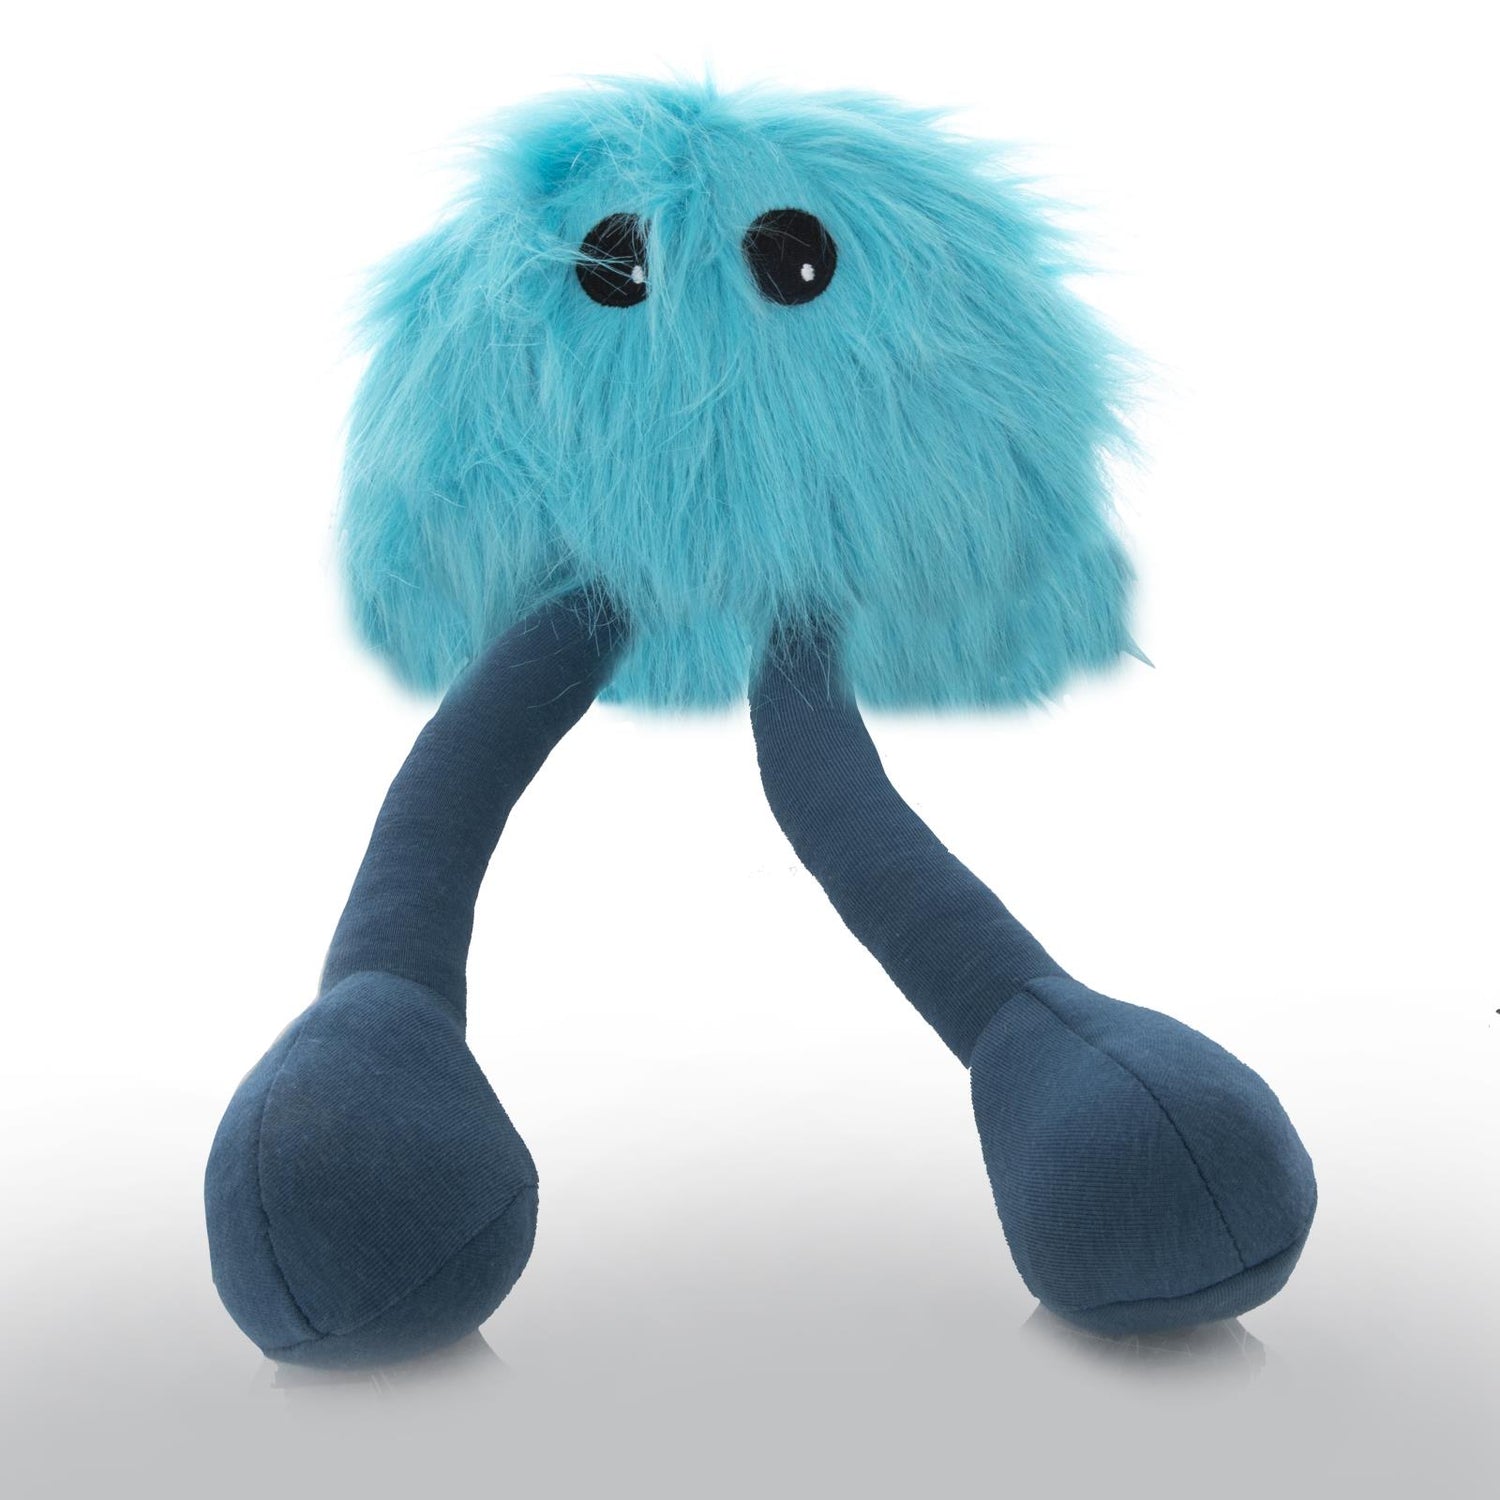 Plush Toy: Blue the Puff